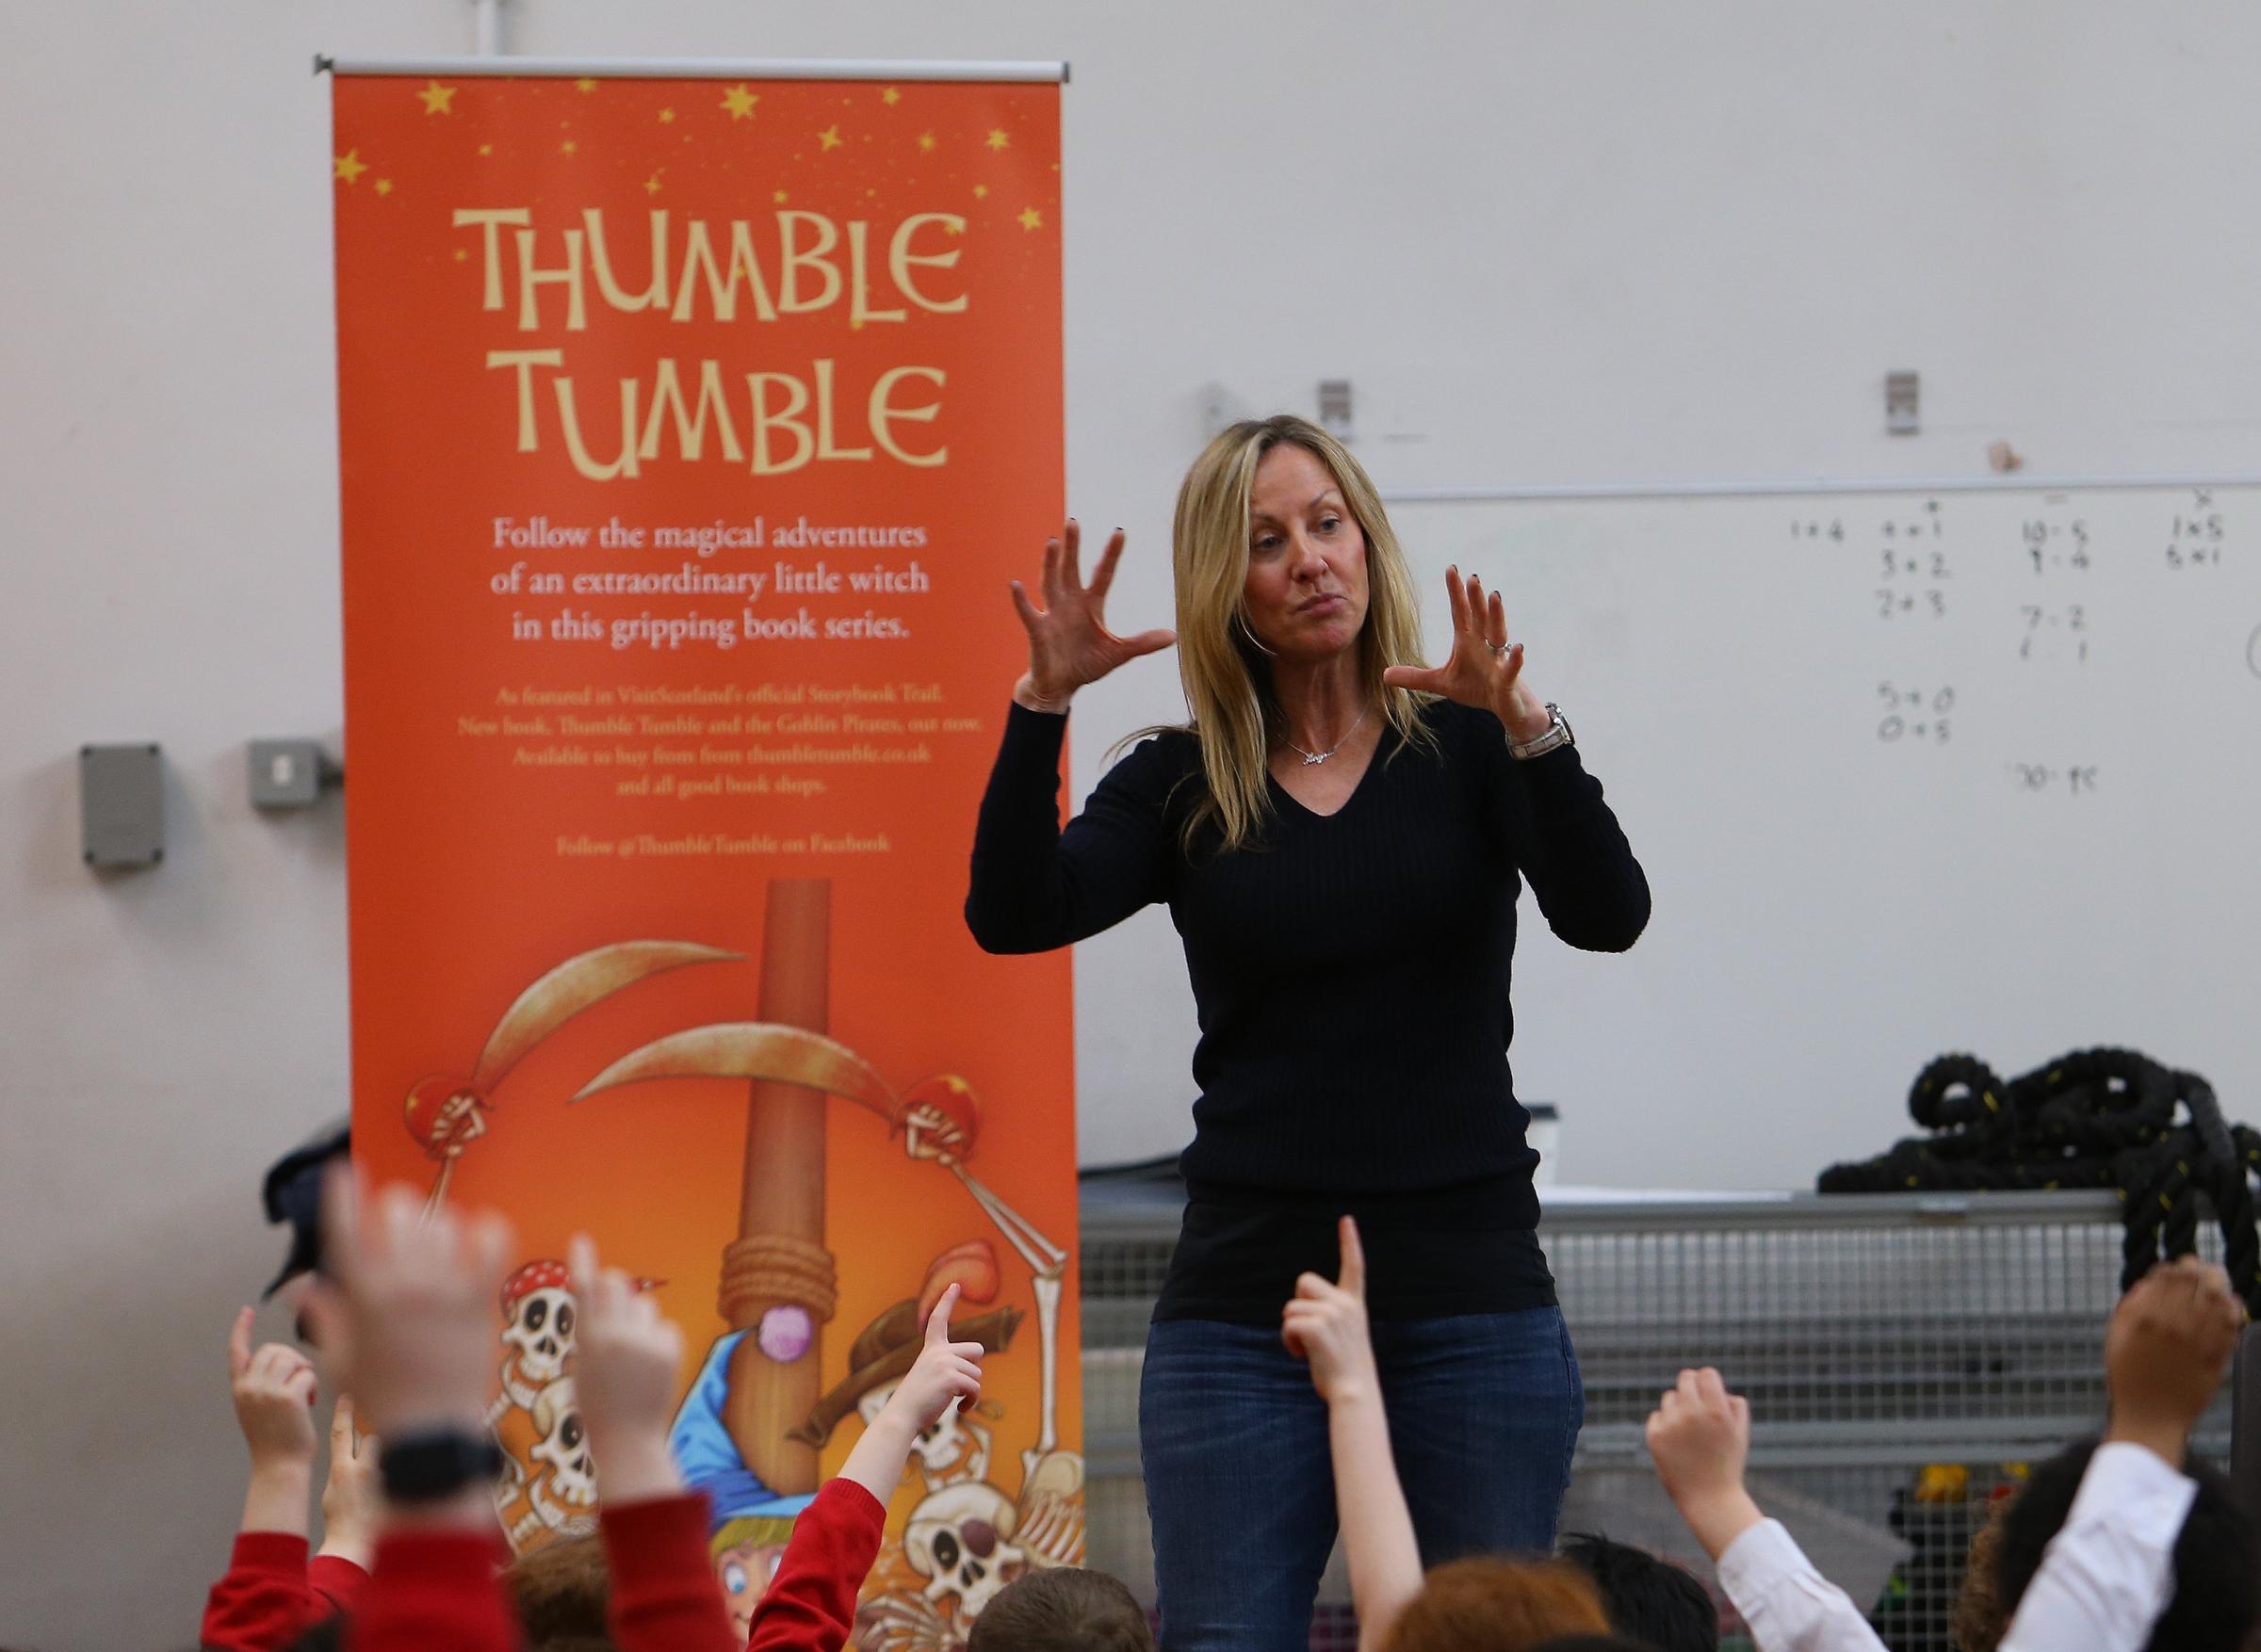 Angela Proctor is the author of the Thumble Tumble stories for children. Pic: Colin Mearns